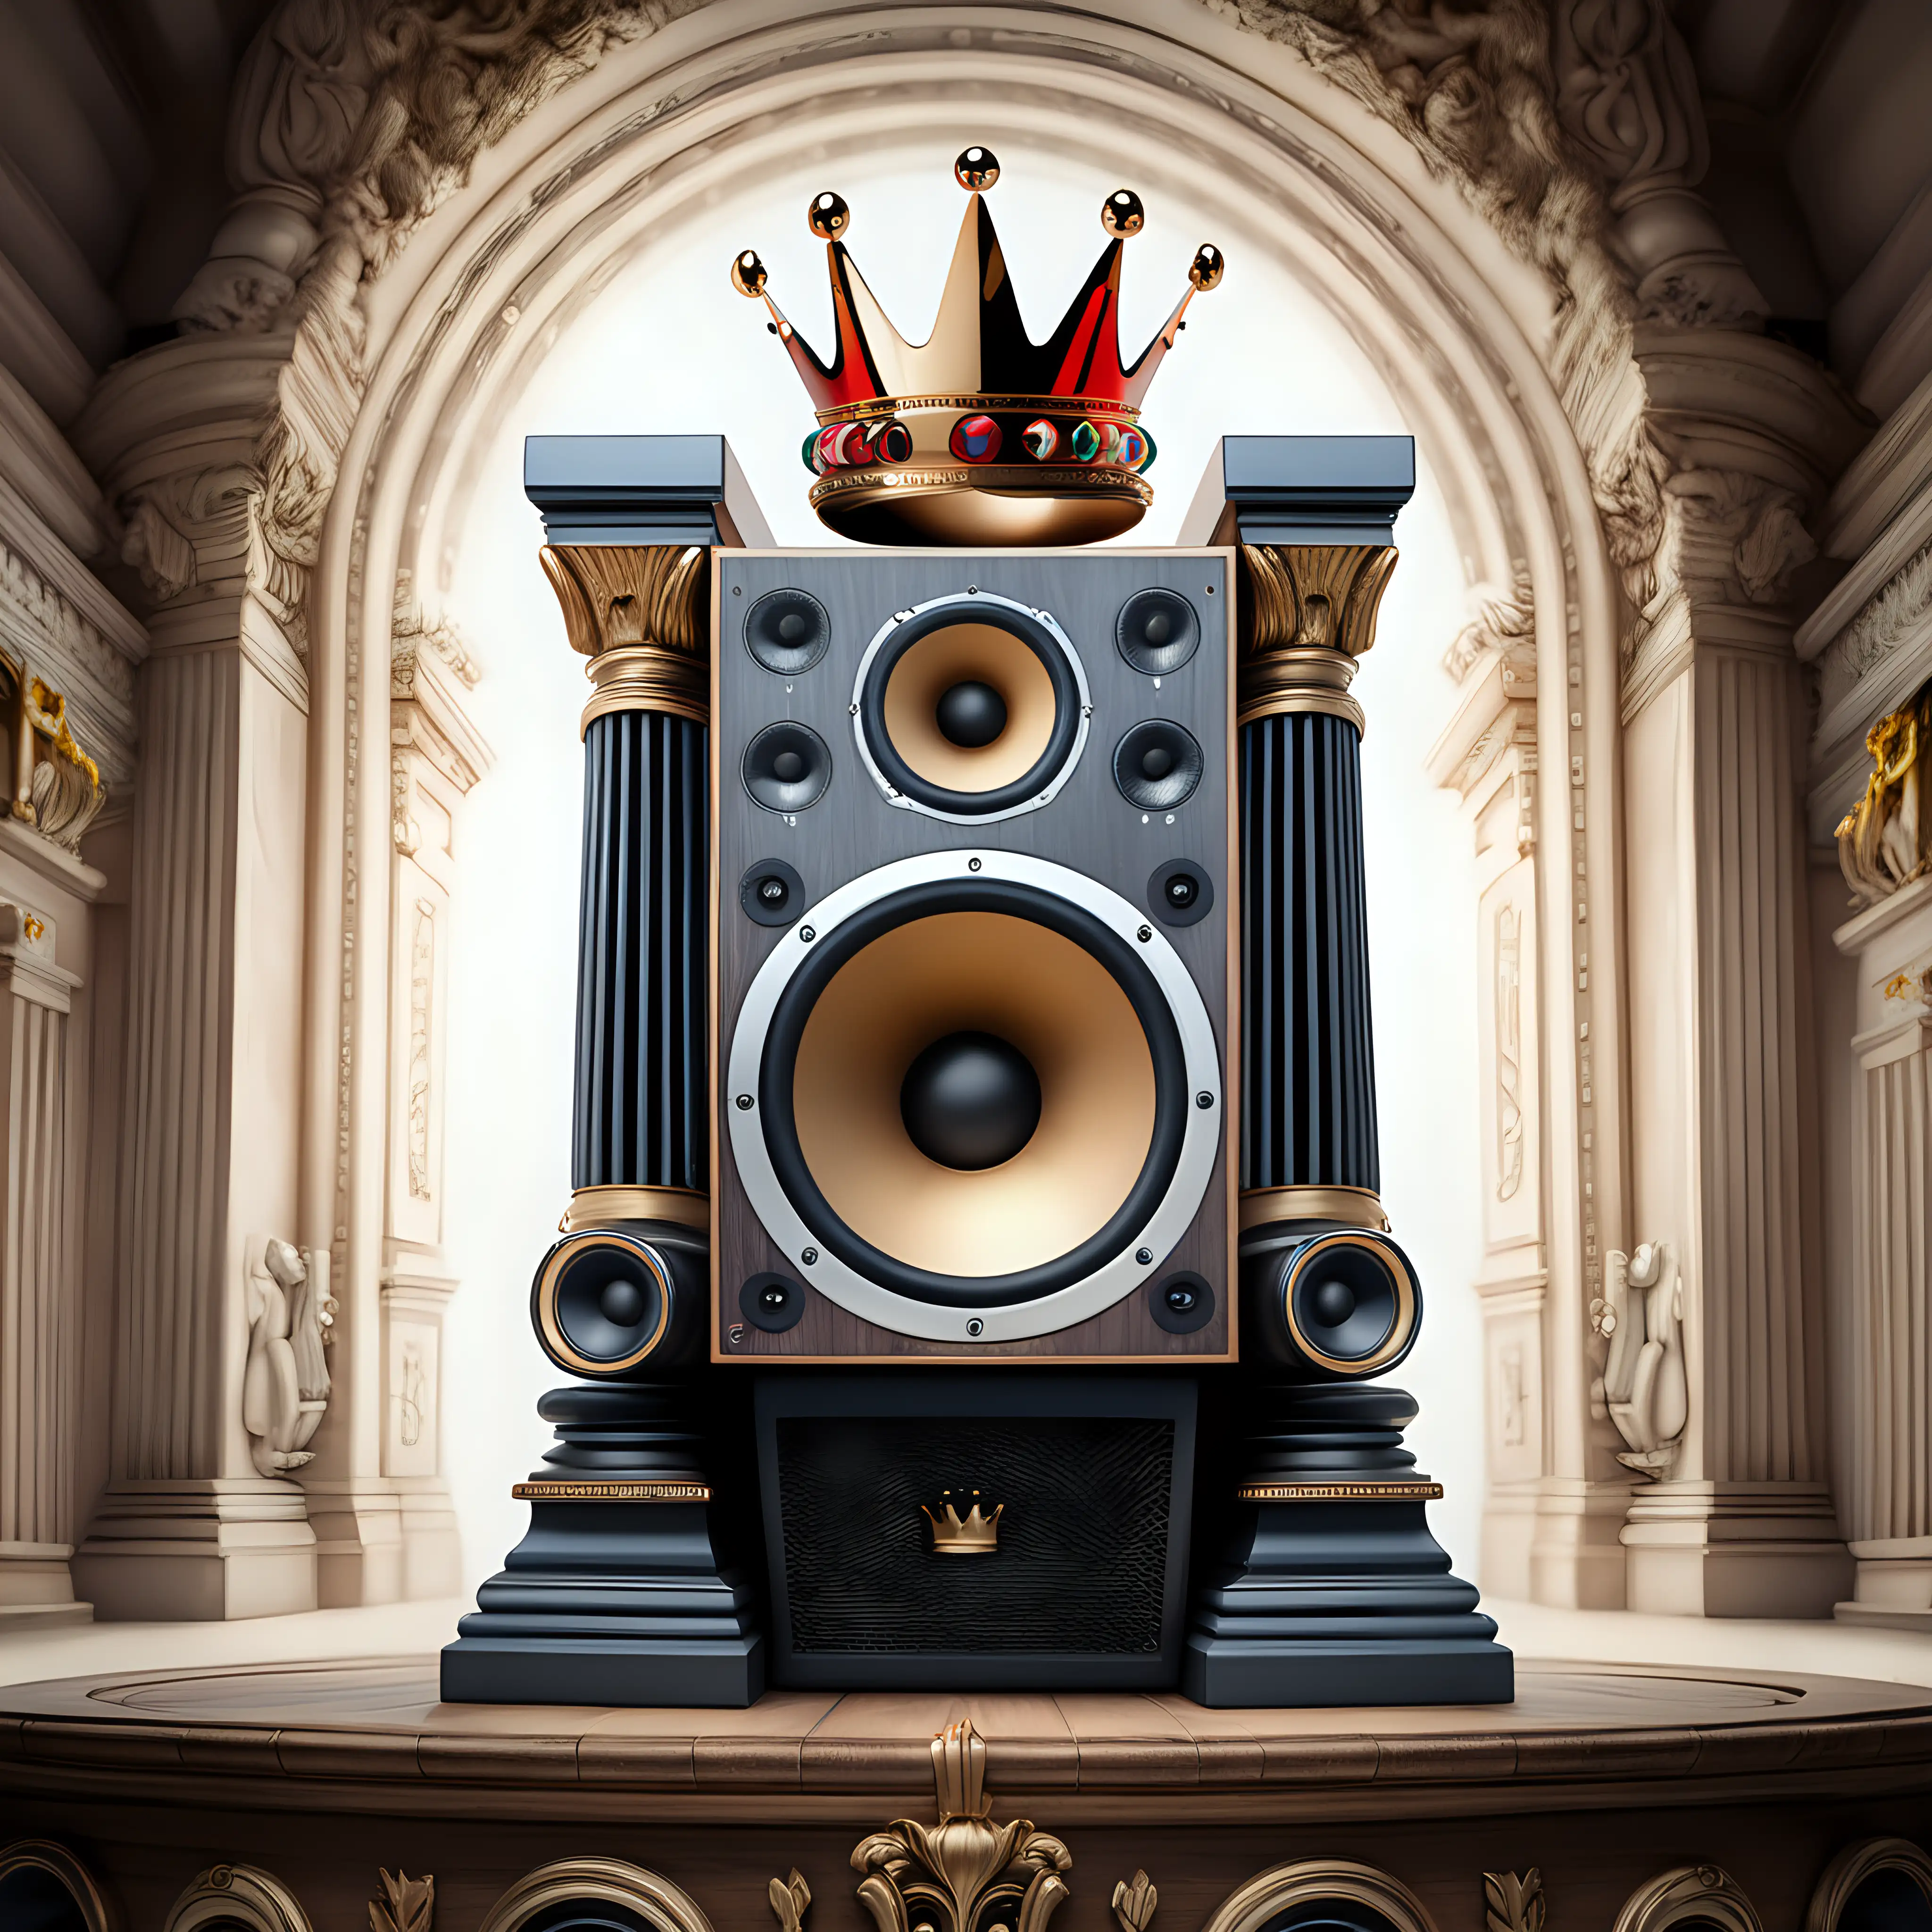 a large music speaker on a throne made small music speakers, with a crown on top